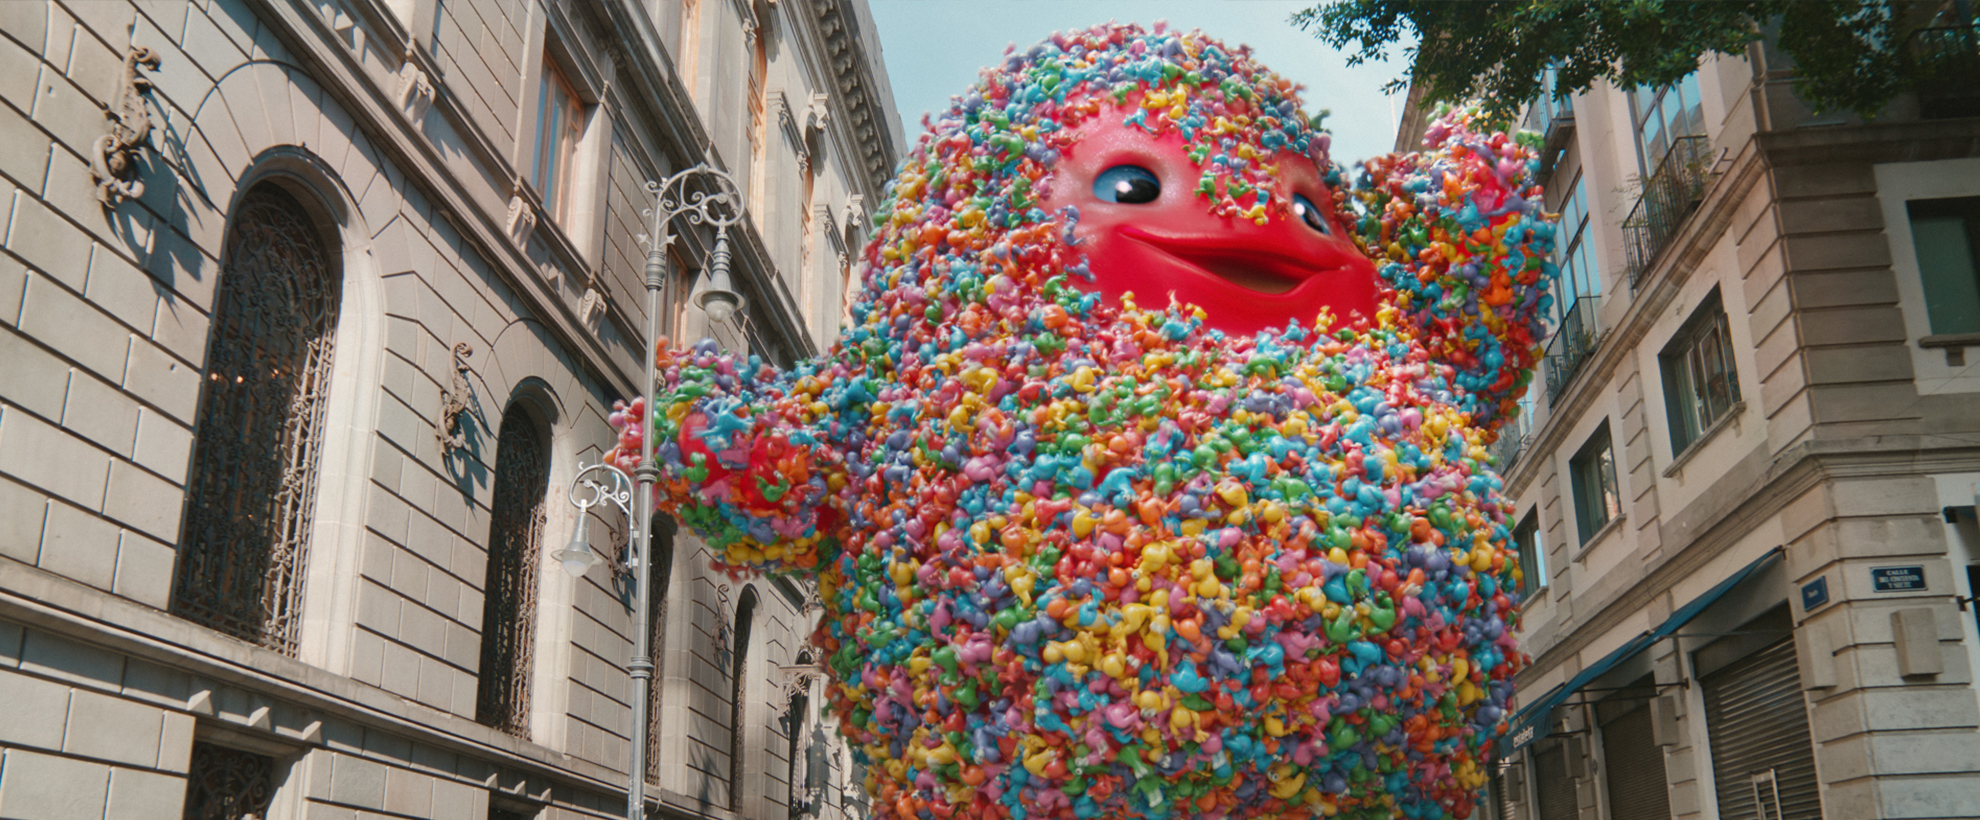 A giant gummy monster walks through a city with hundreds of nerds candy attached to it